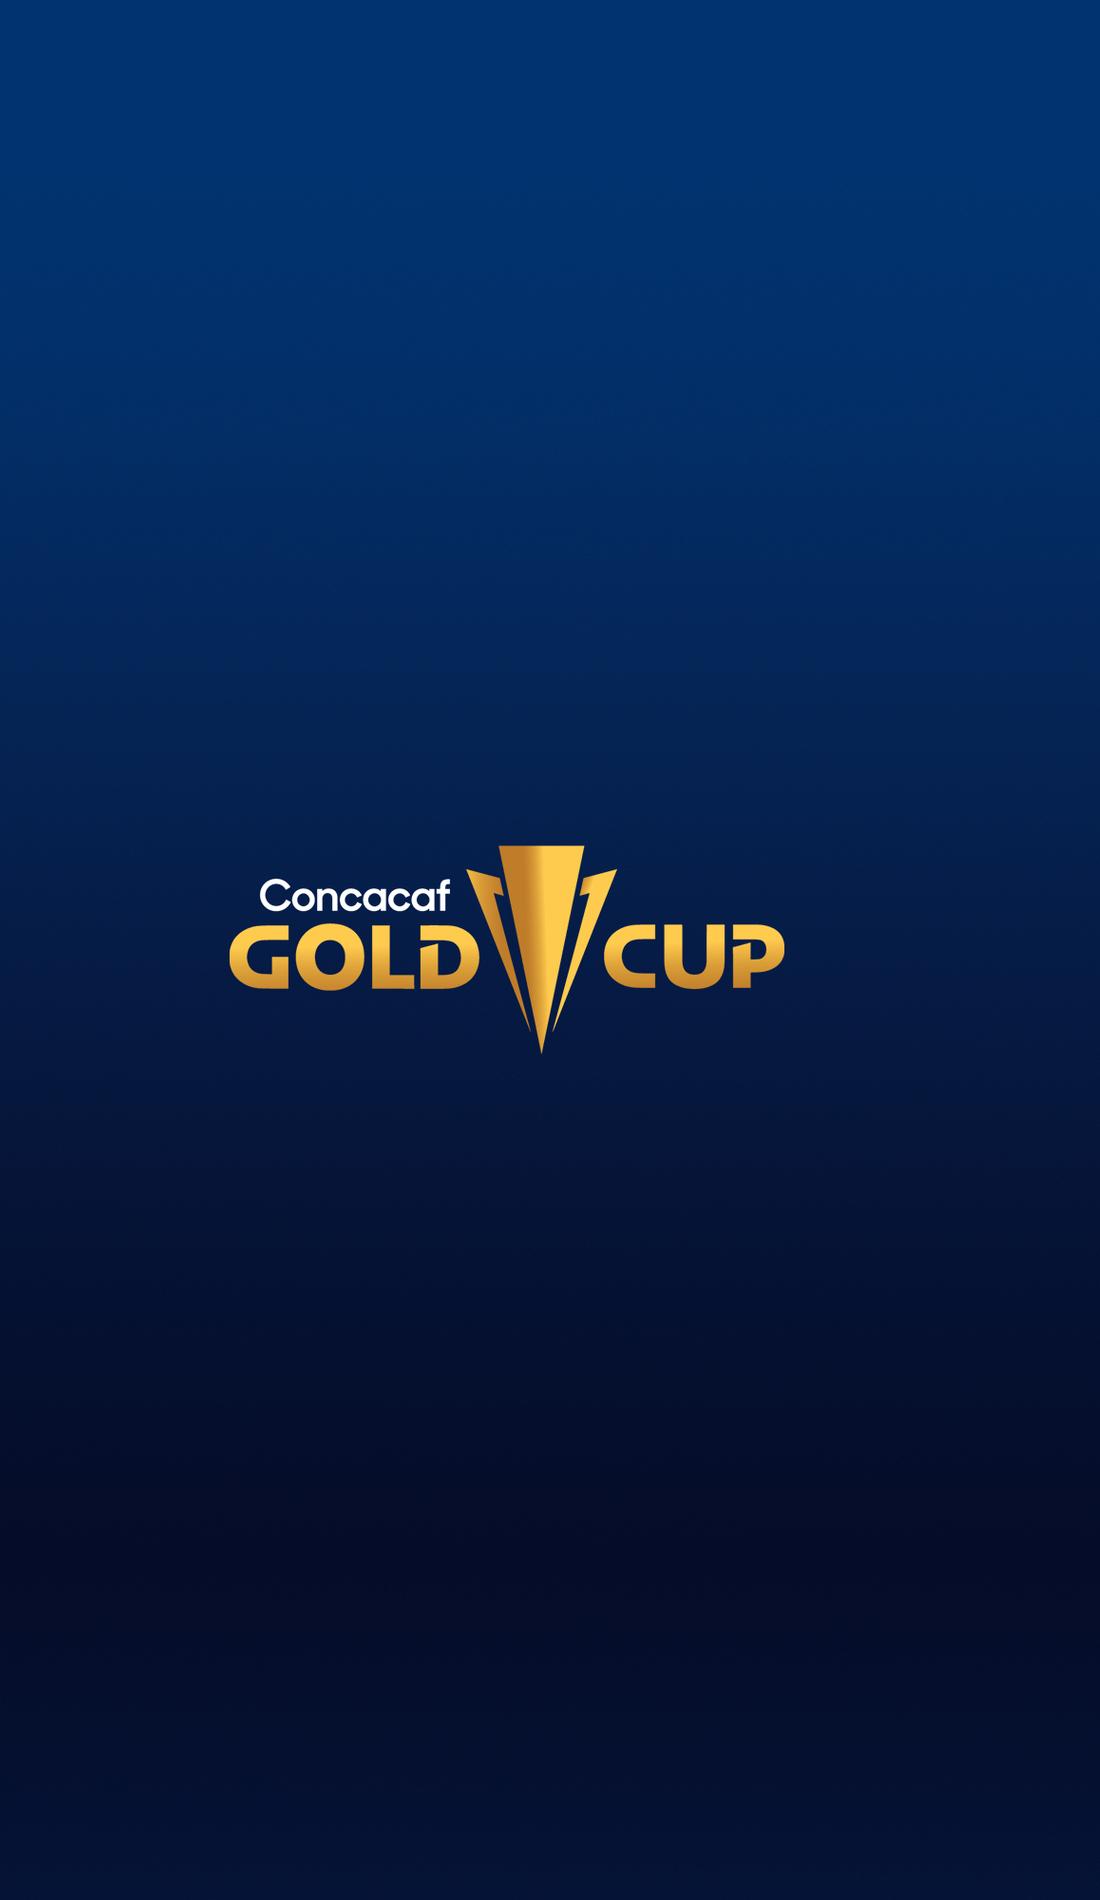 Gold Cup 2023 draw results: Canada to face Cuba, Guatemala and Team TBD